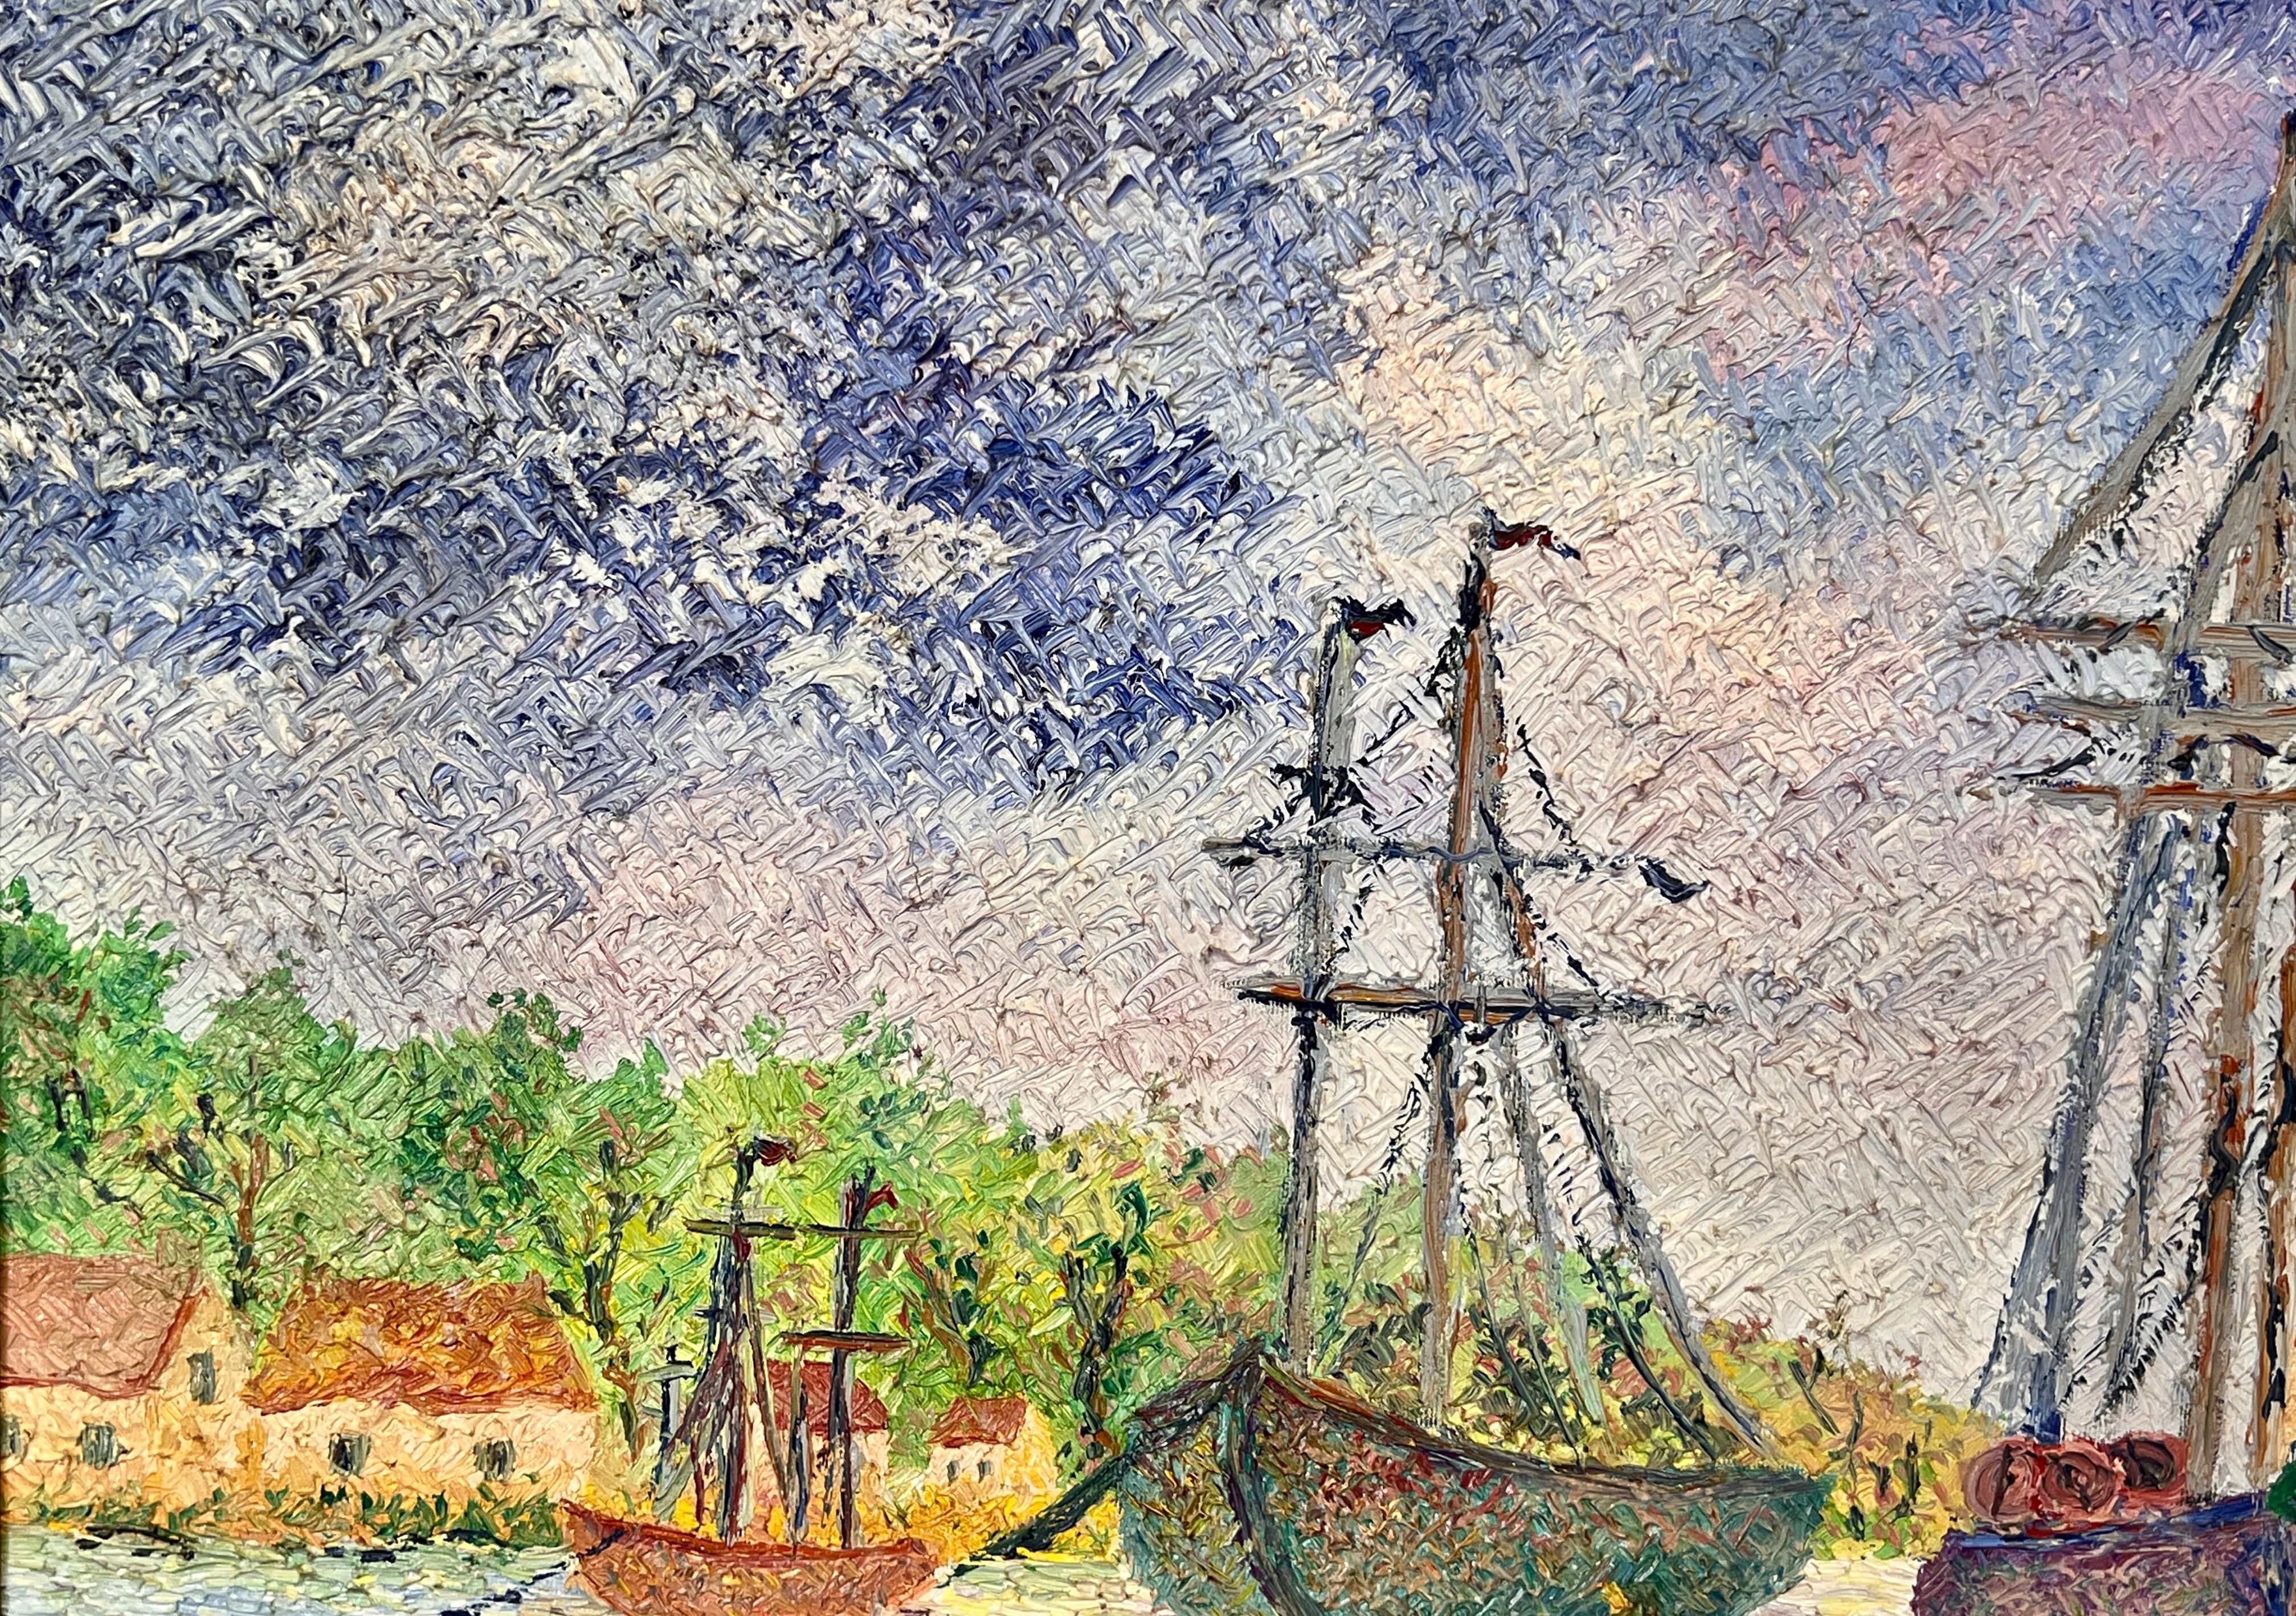 Le port De Taumeck en France is an exquisite oil painting on canvas by Lelia Pissarro, created in the impressionist style. The artwork beautifully captures the scenic port of Taumeck in France, showcasing a delightful combination of vibrant colors